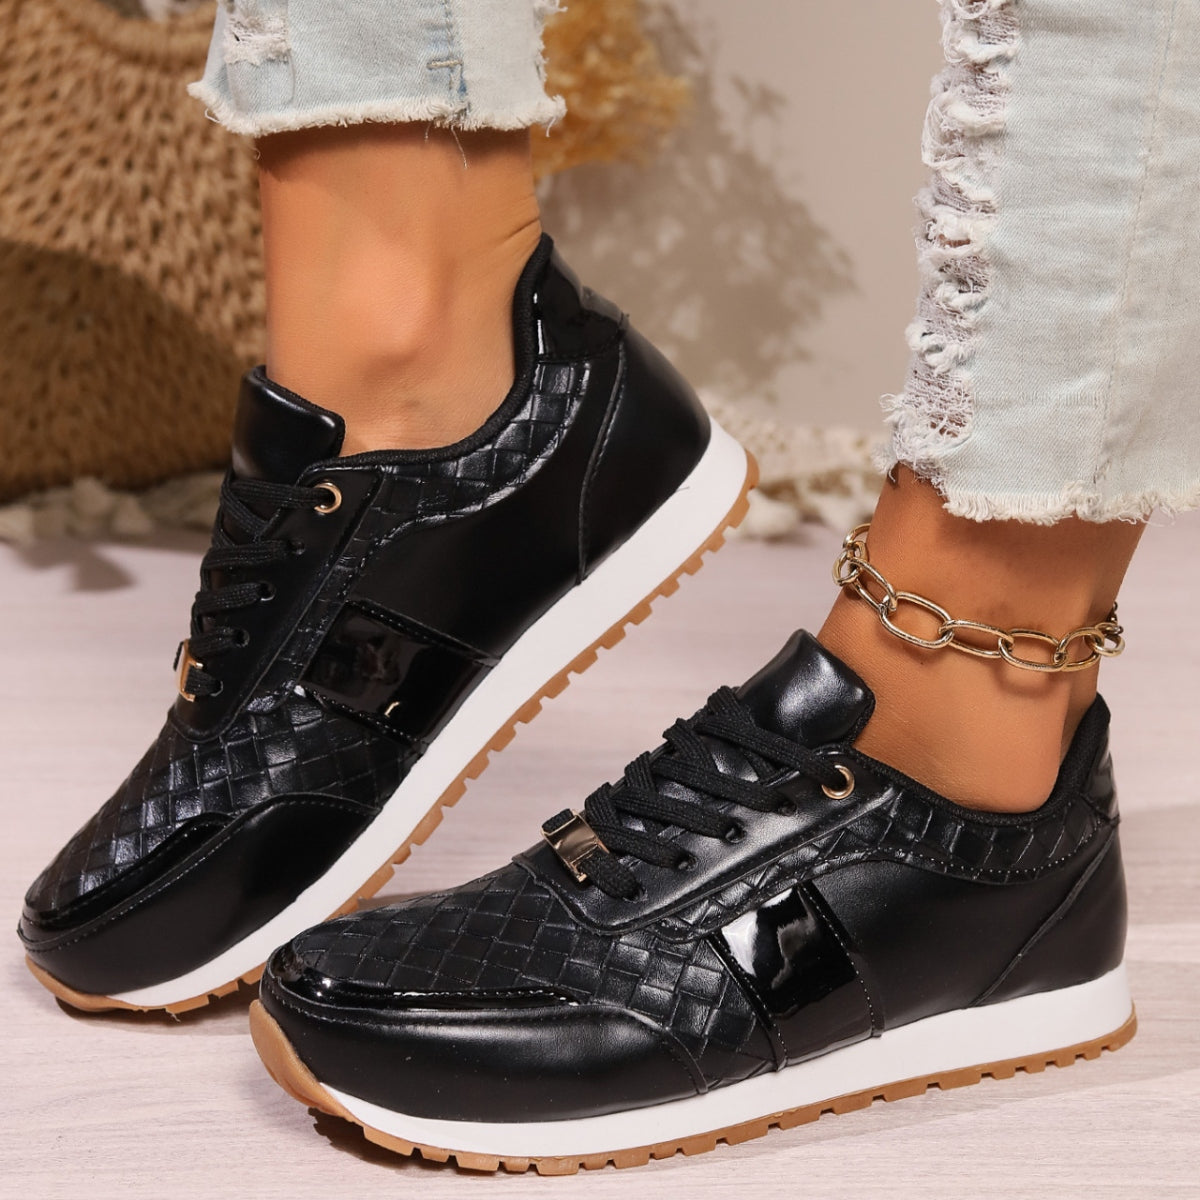 Lace-Up PU Leather Sneakers - House of Binx 